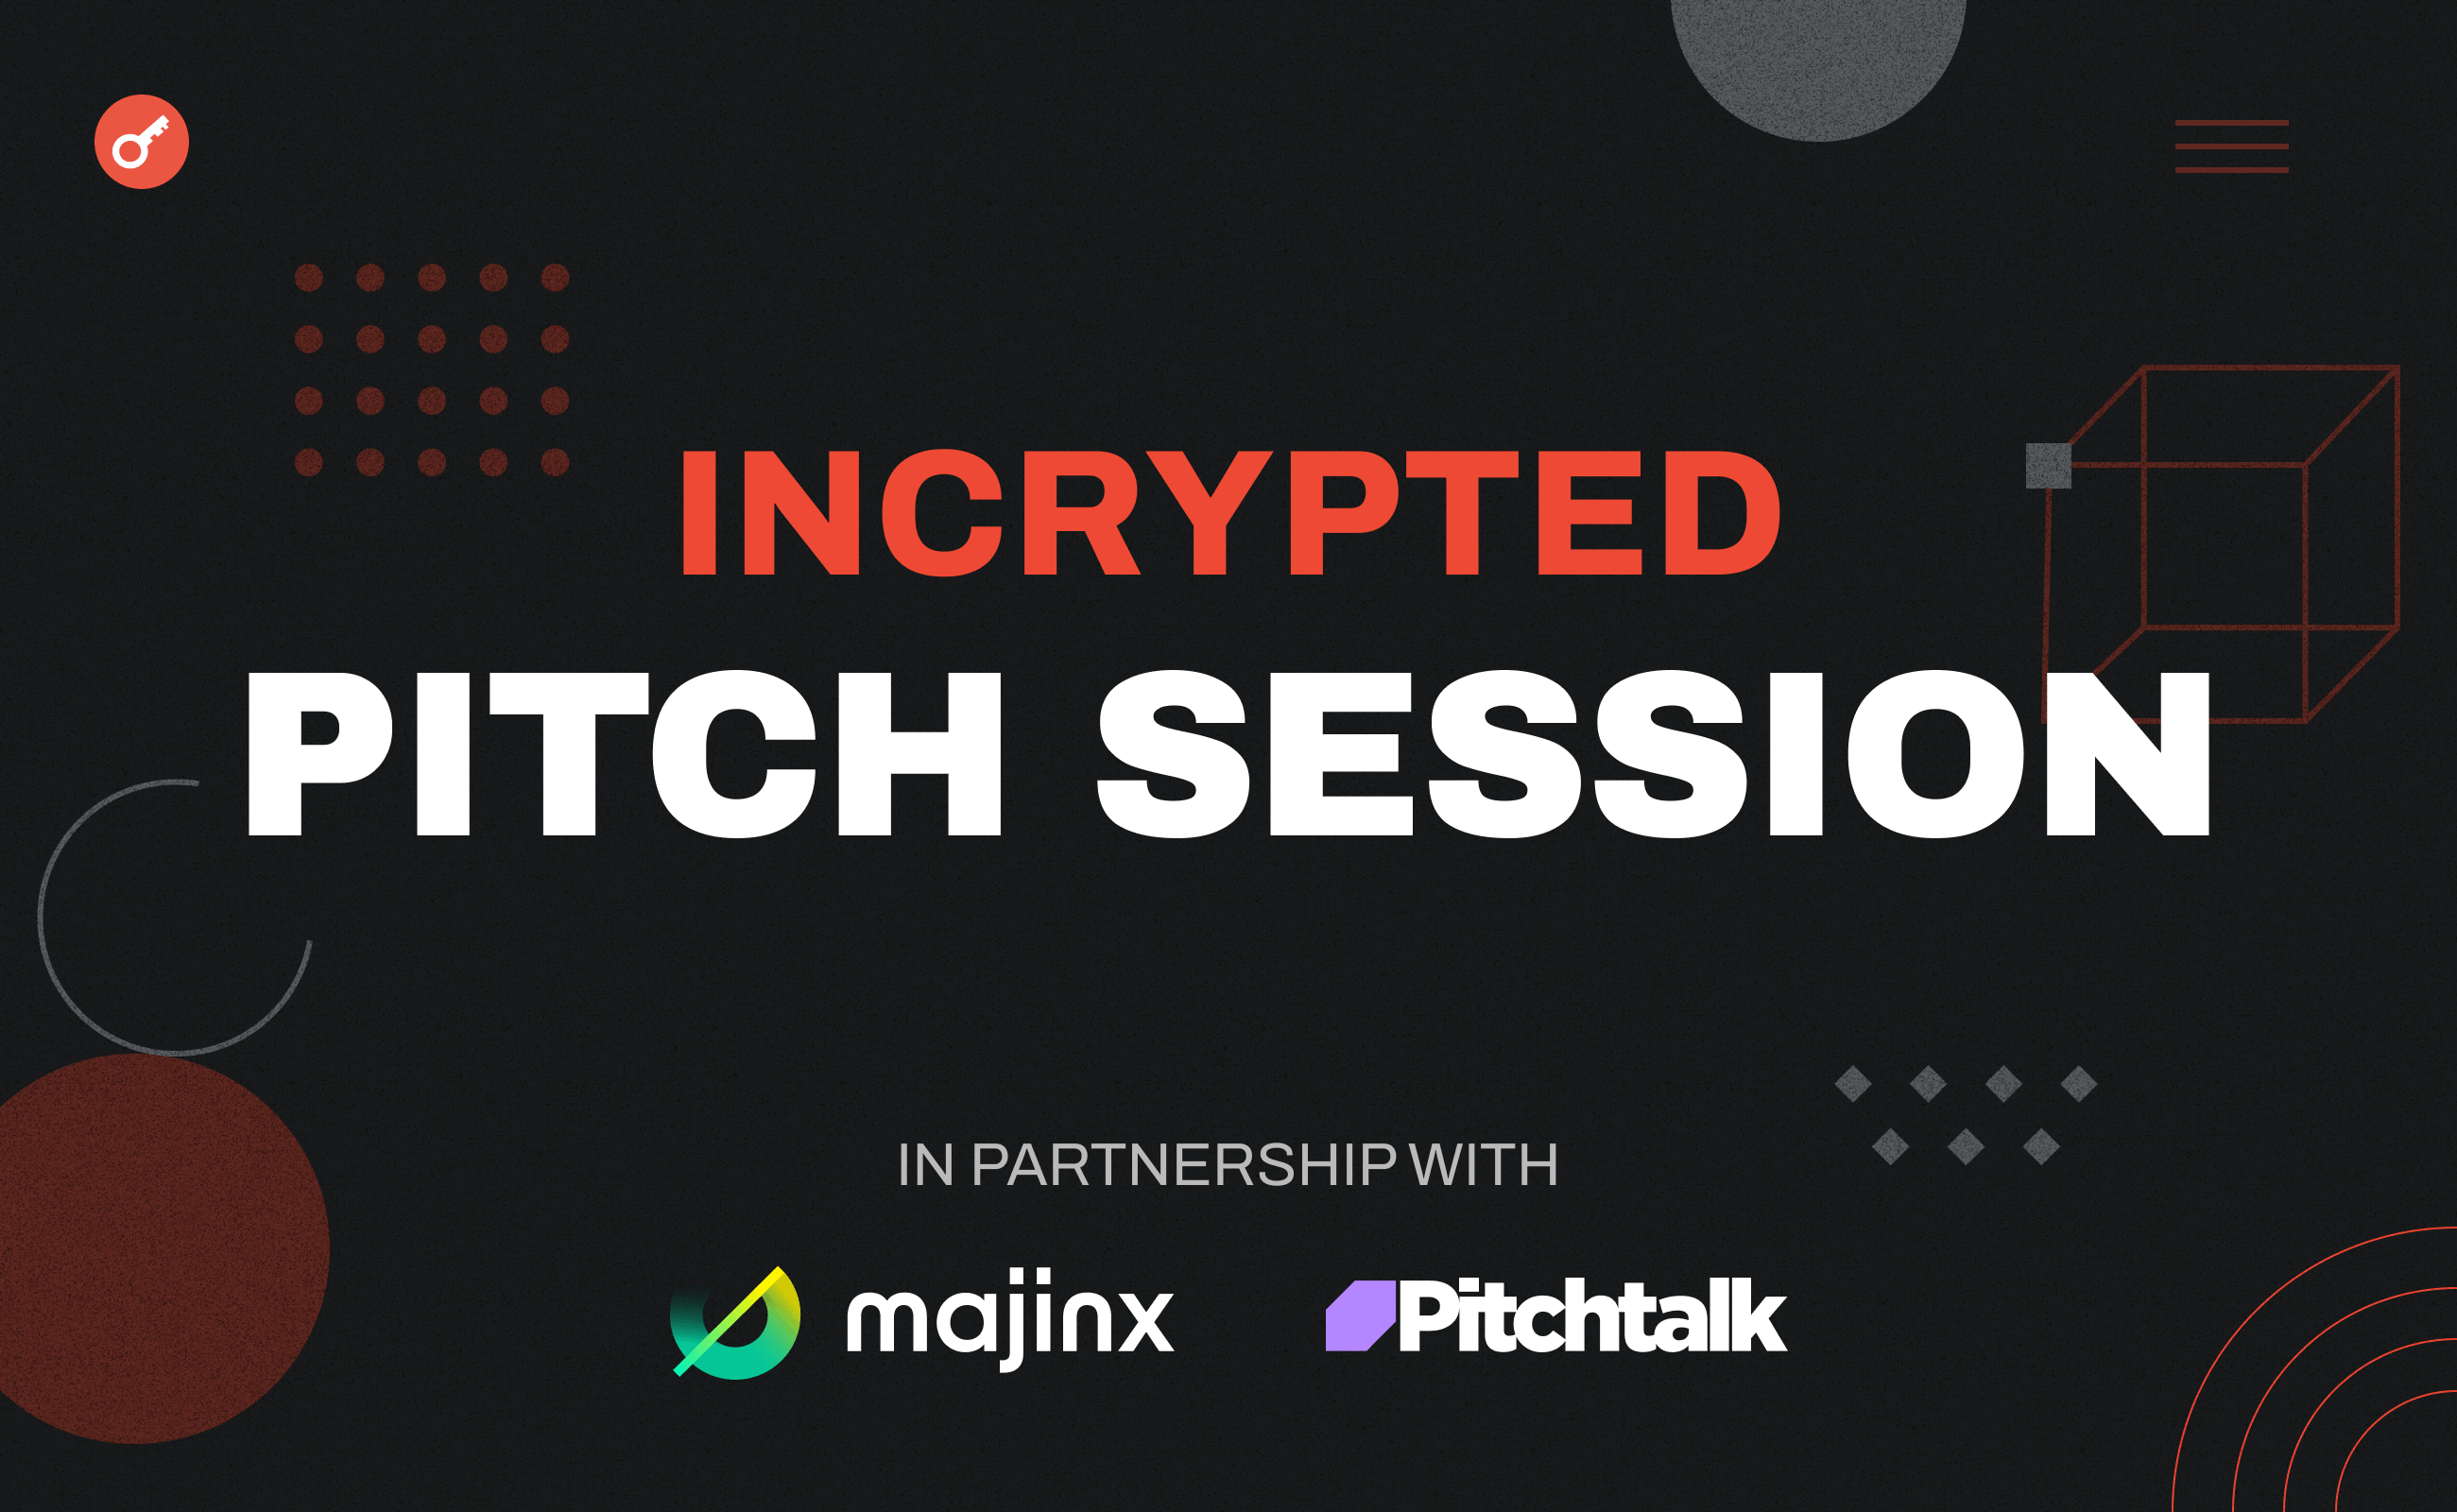 Incrypted Pitch Session: details, winners and prizes. Заглавный коллаж статьи.